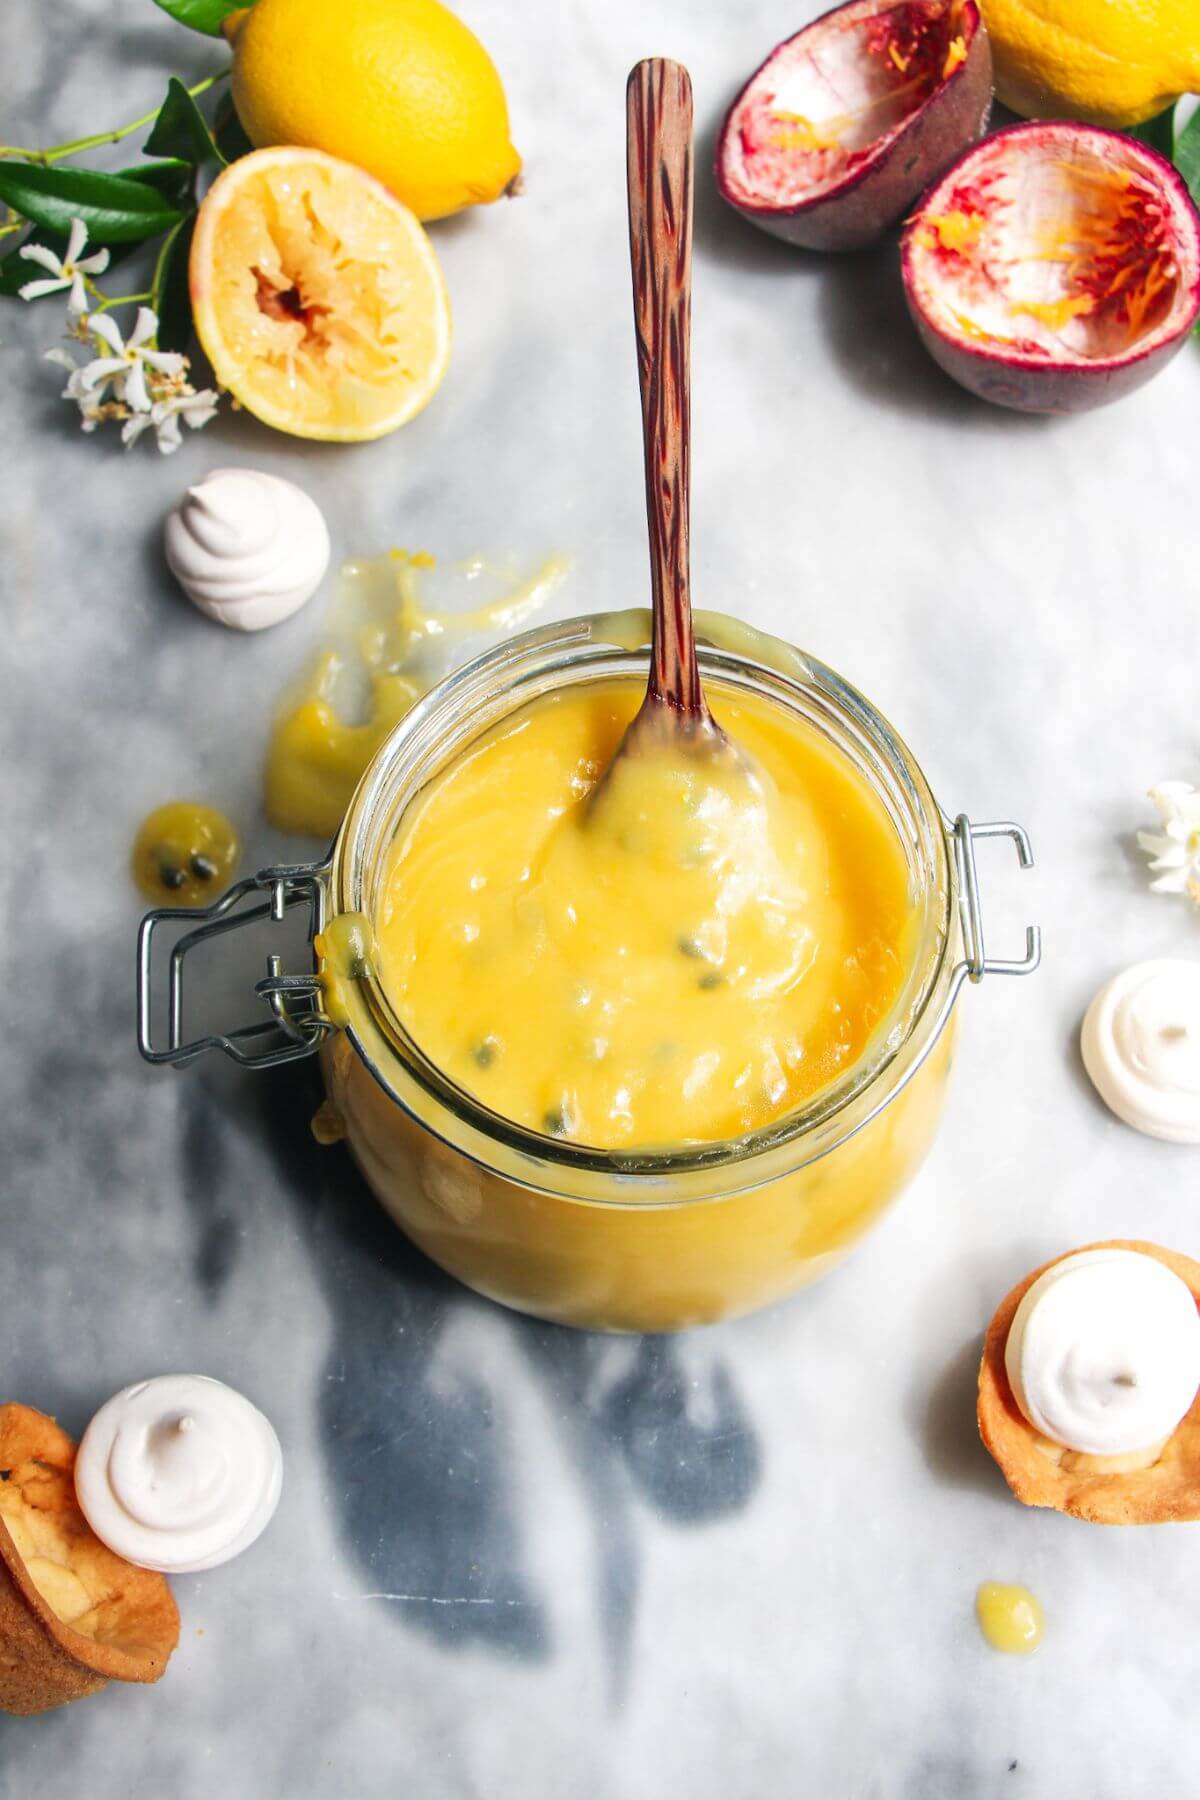 Lemon and passionfruit in a glass jar with a spoon in it.